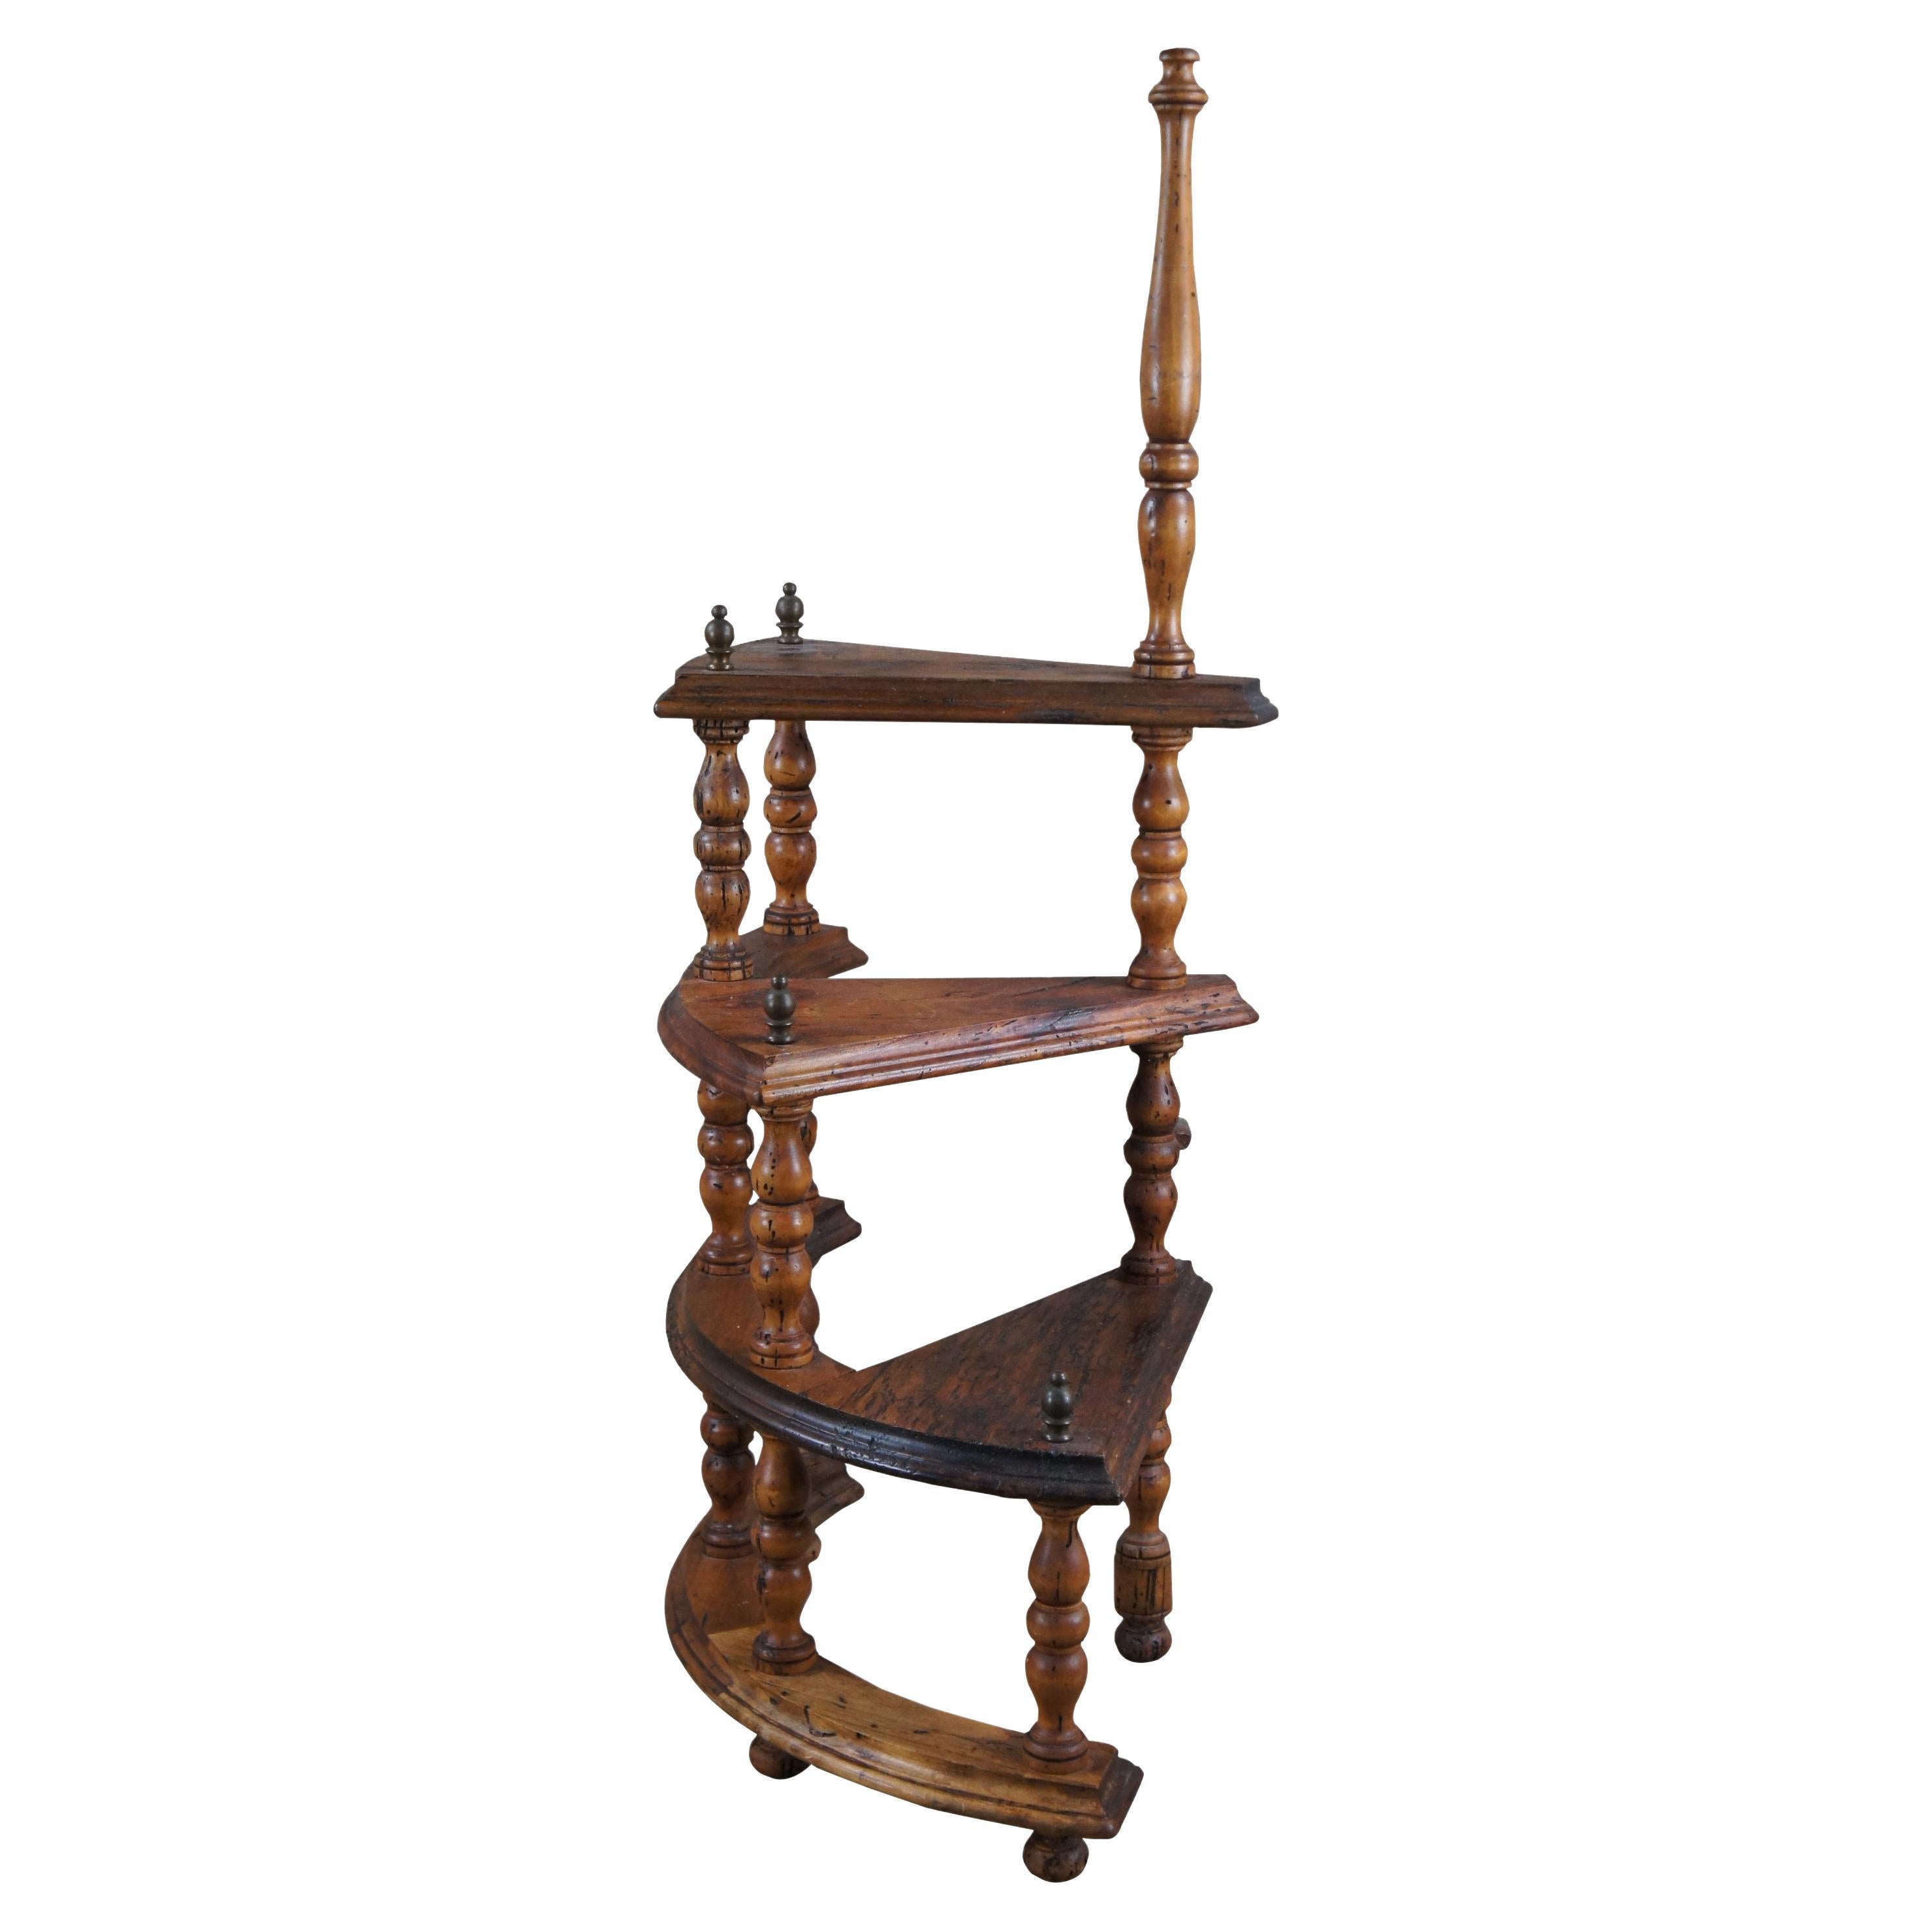 Antique spiral library book staircase or step ladder. Made of walnut featuring three tiers with turned posts and brass finials. Measure: 44